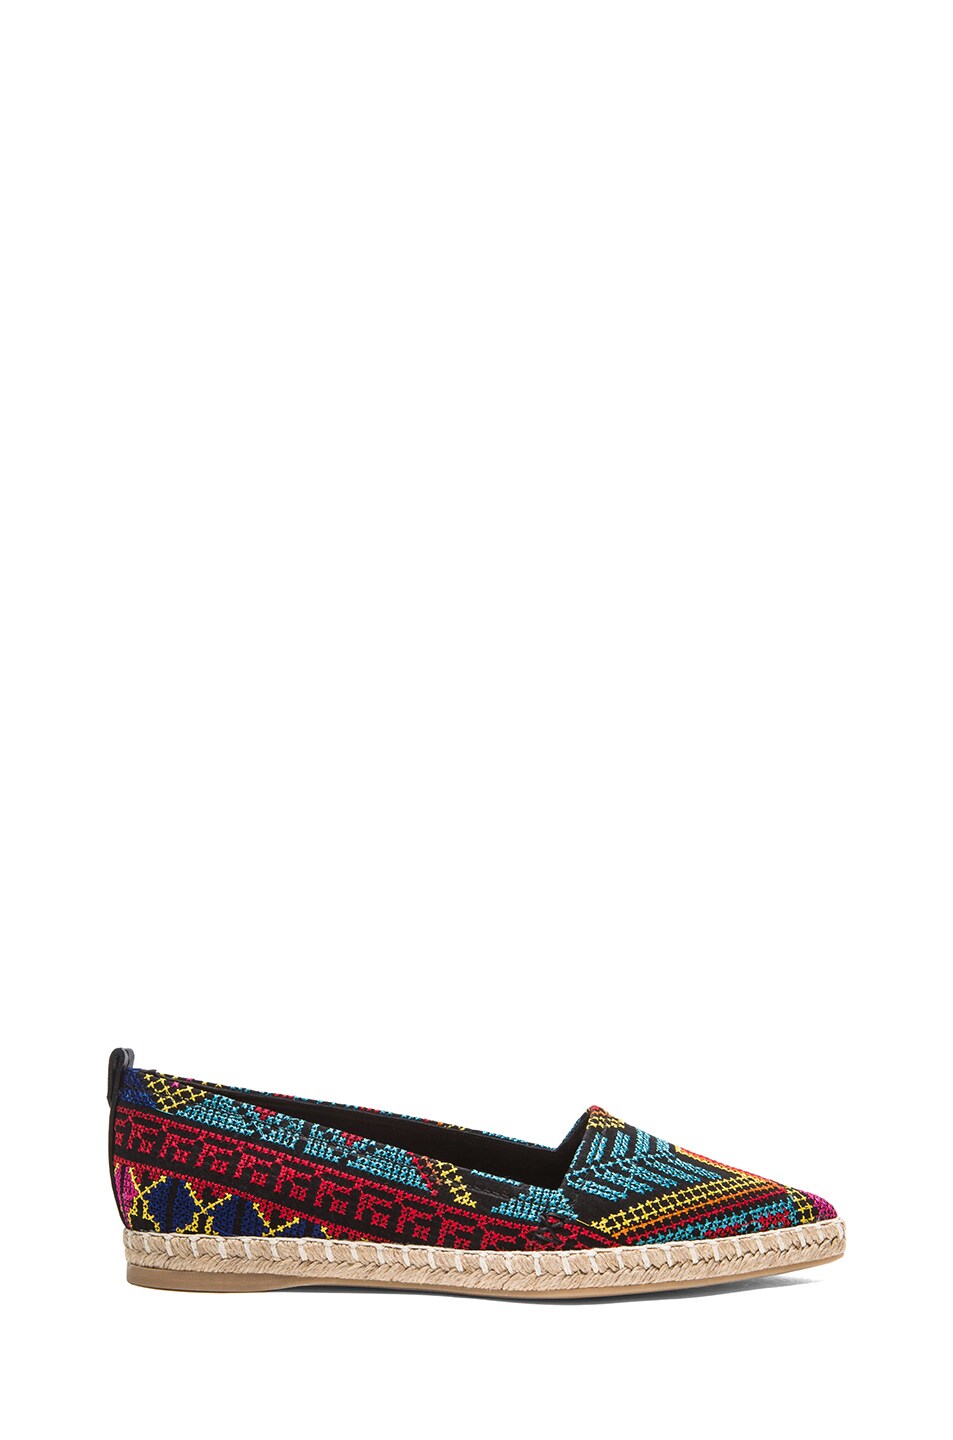 Image 1 of Nicholas Kirkwood Mexican Embroidered Twill Espadrilles in Blue & Yellow